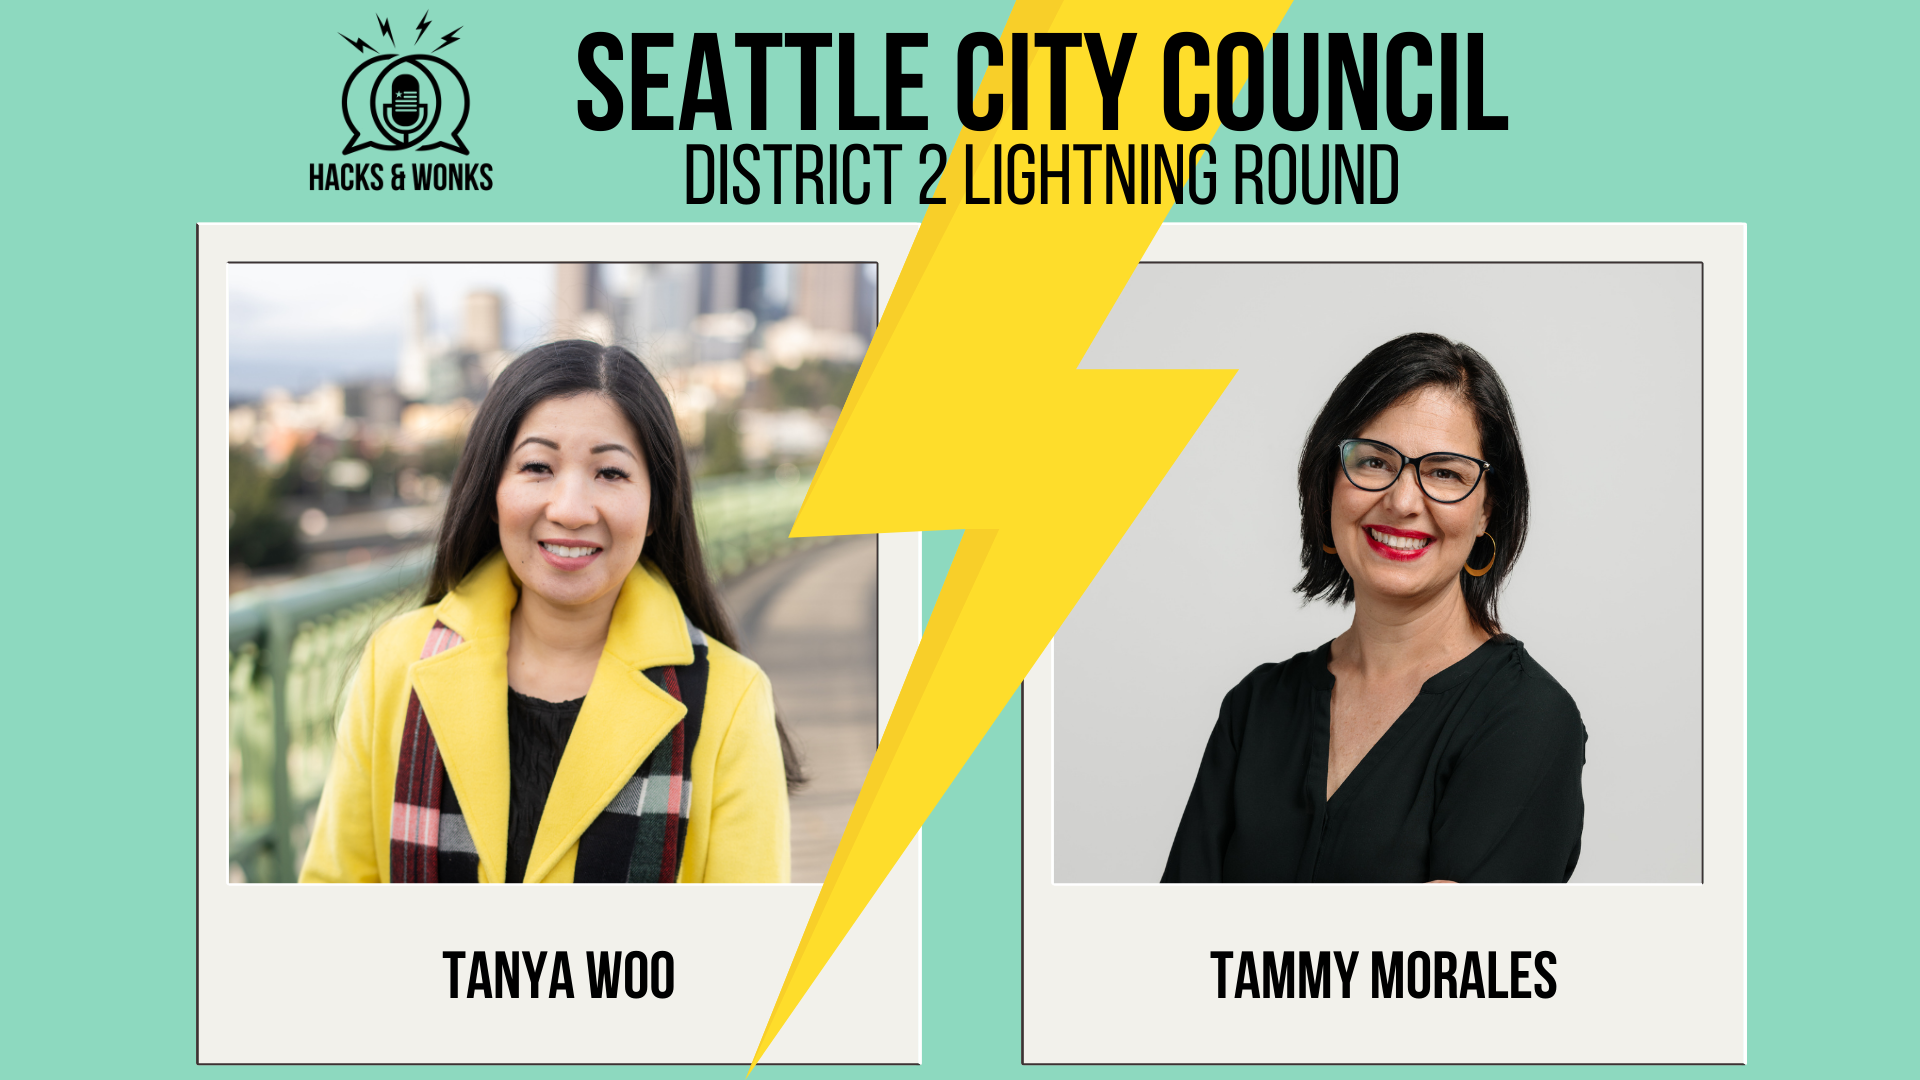 Lightning bolt divides photos of the District 2 candidates: Tanya Woo and Tammy Morales